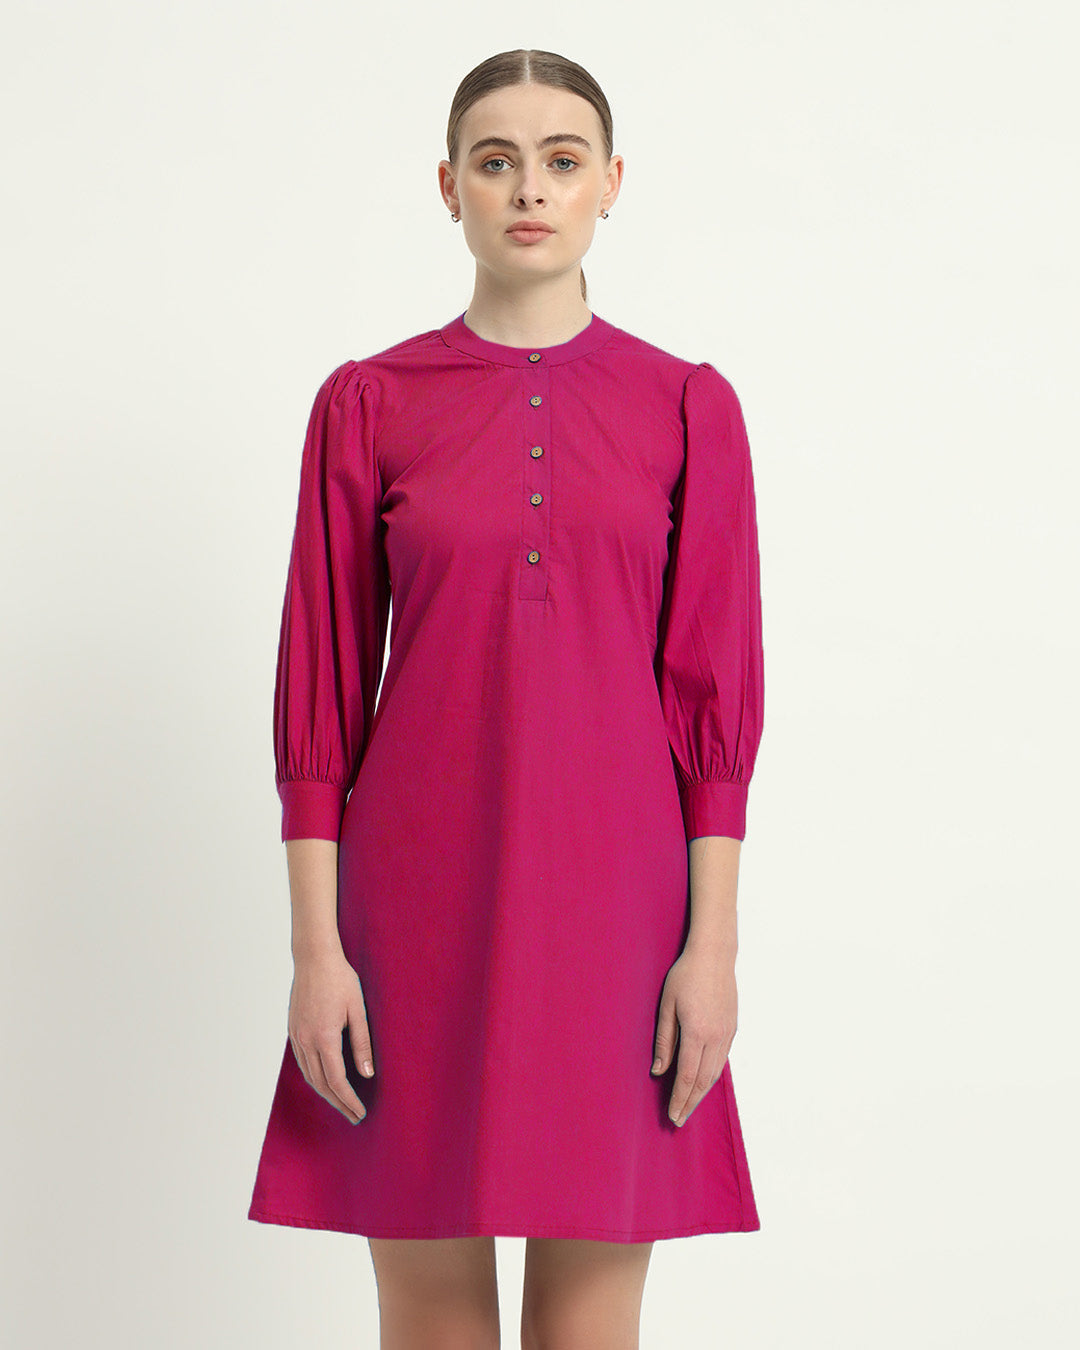 The Berry Roslyn Cotton Dress